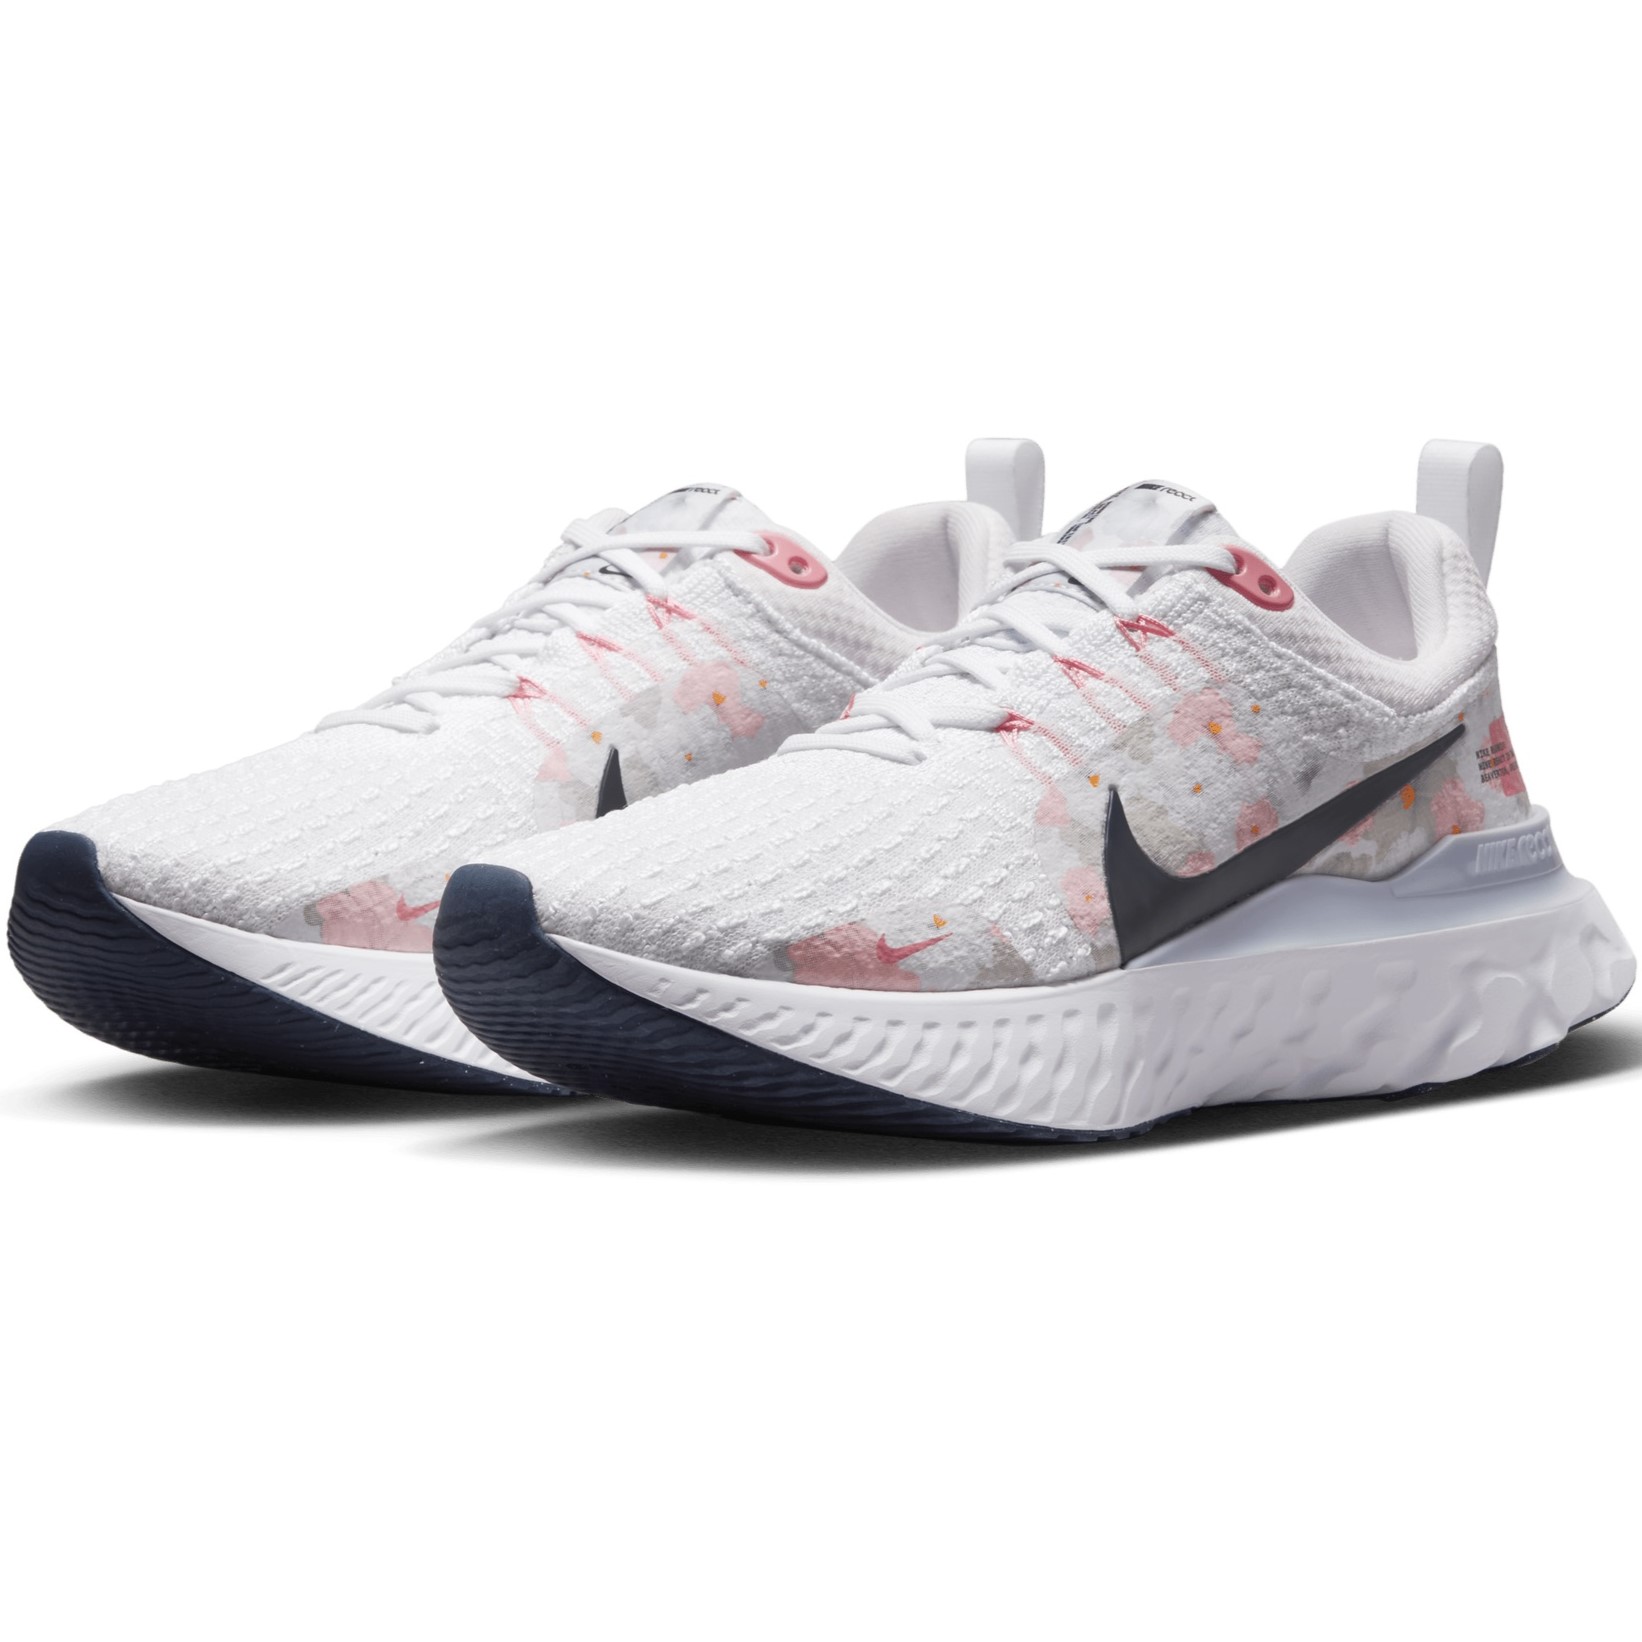 GIÀY NIKE NỮ REACT INFINITY 3 PREMIUM WHITE PEARL PINK WOMENS ROAD RUNNING SHOES FD4151-100 9